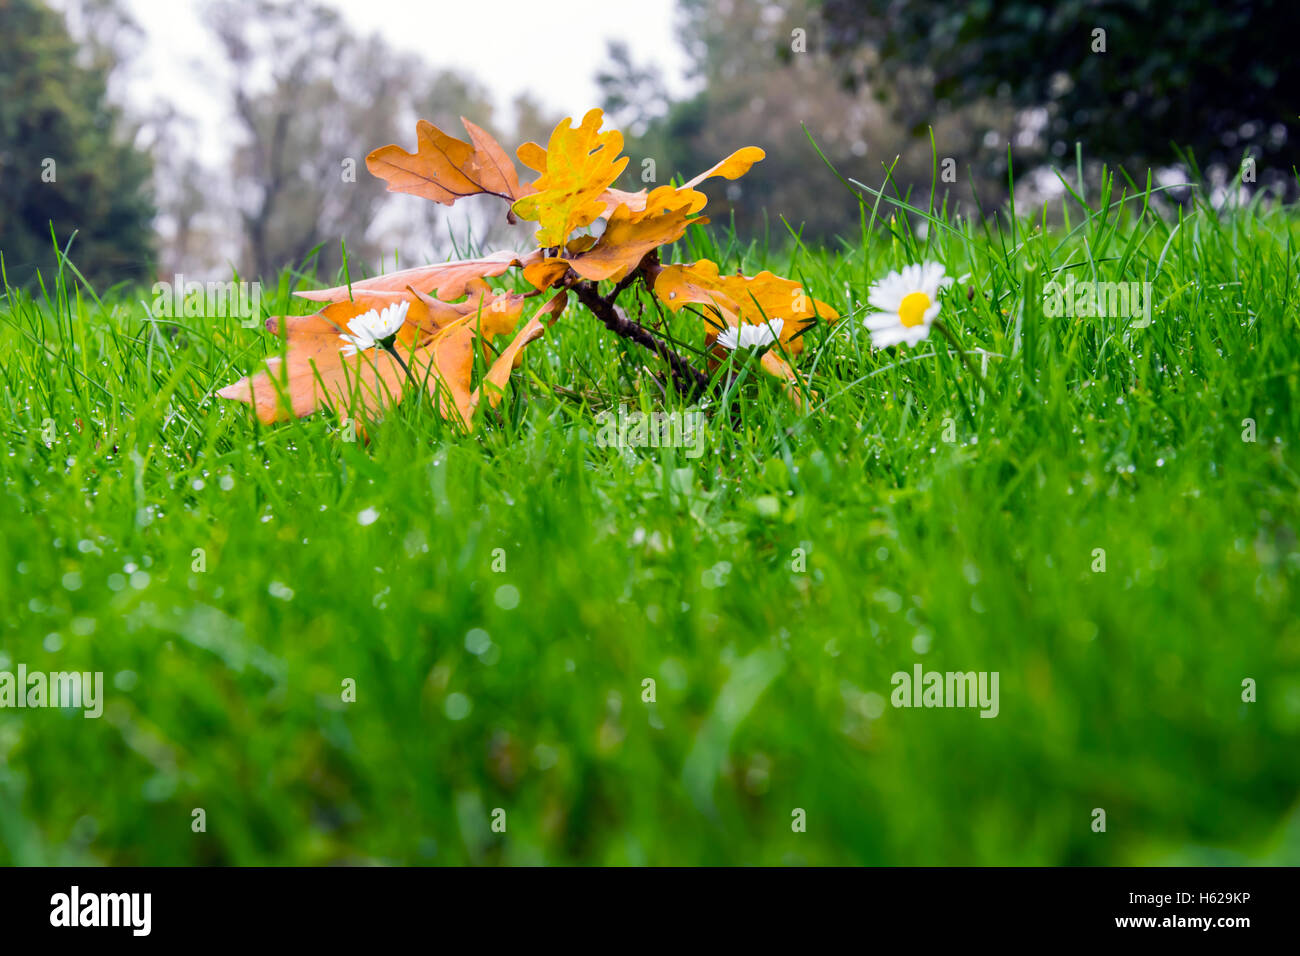 Branch of golden oak leaves lying in green, fresh, raindrops covered grass, in front of a group of small daisies. Stock Photo